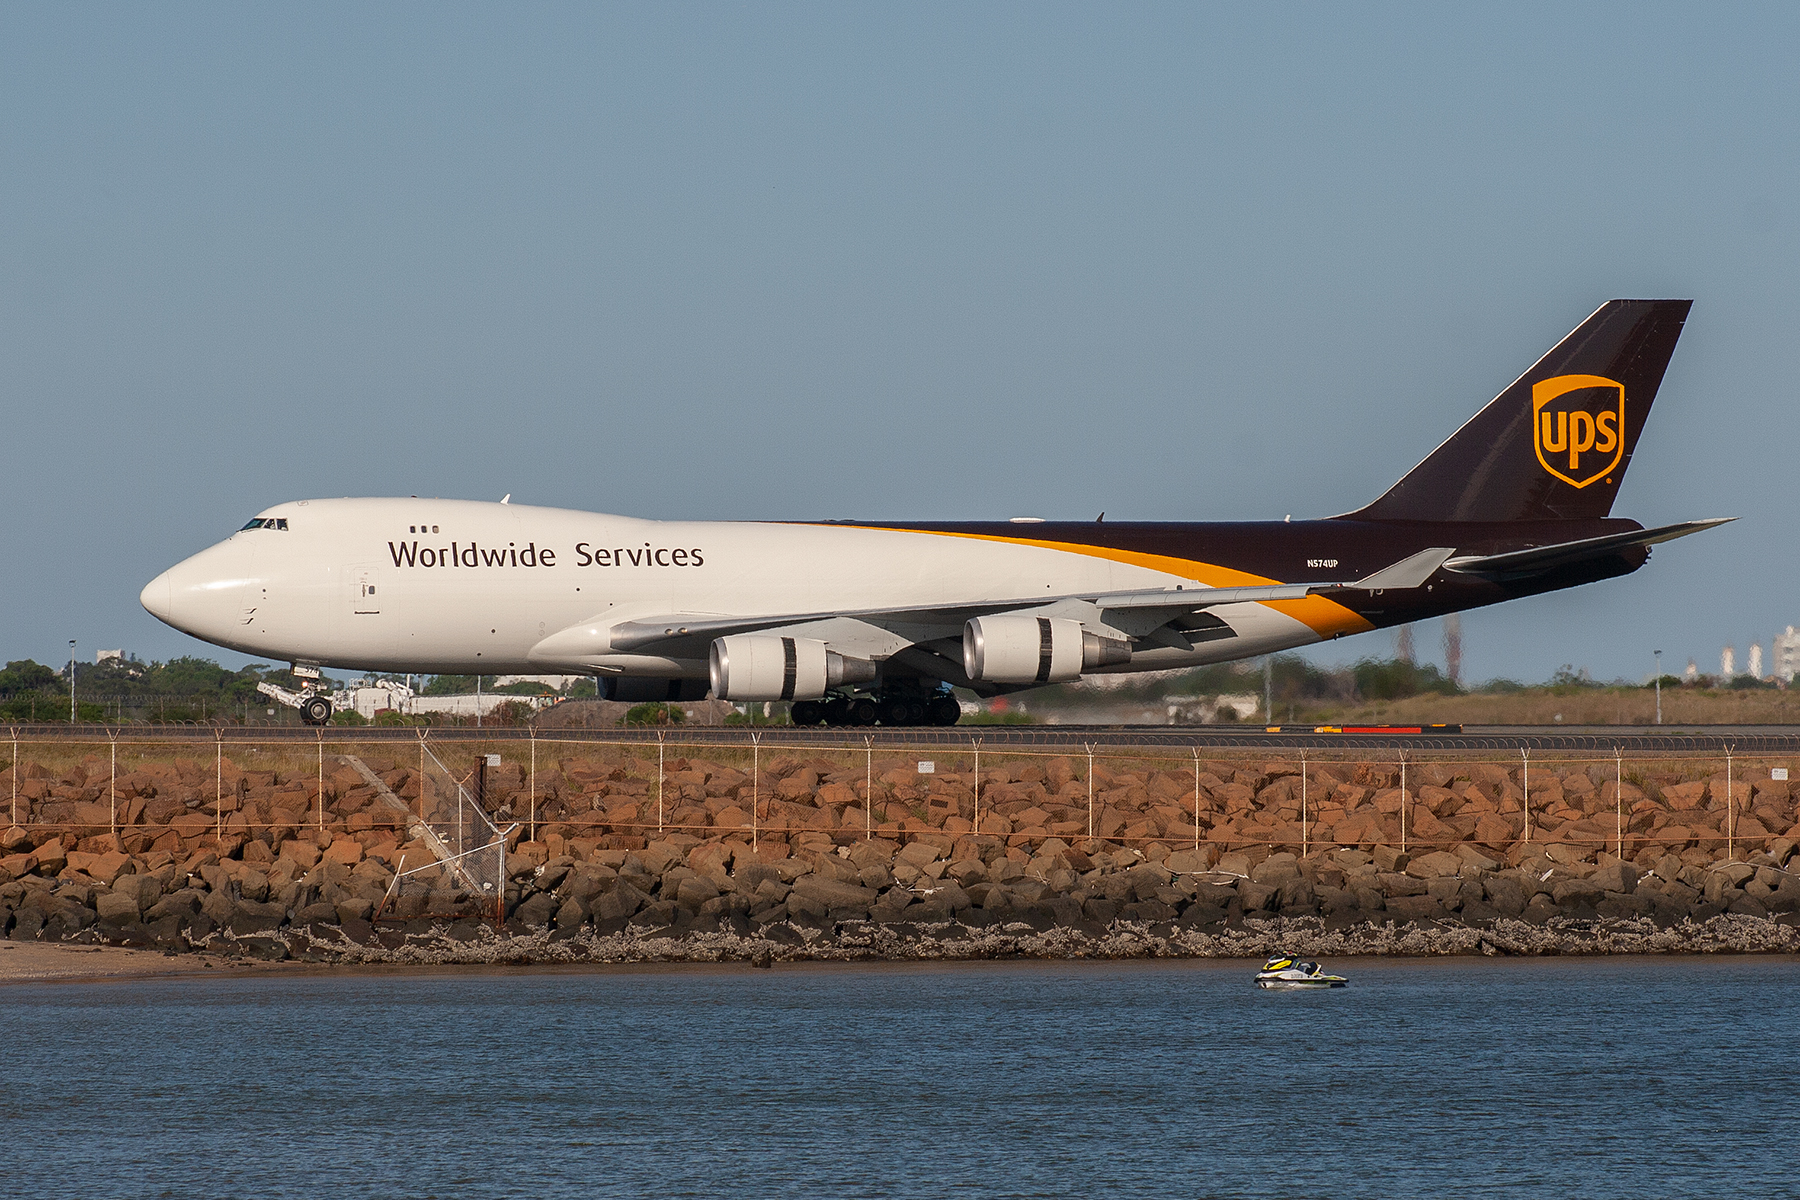 UPS Boeing 747-400F N574UP at Kingsford Smith